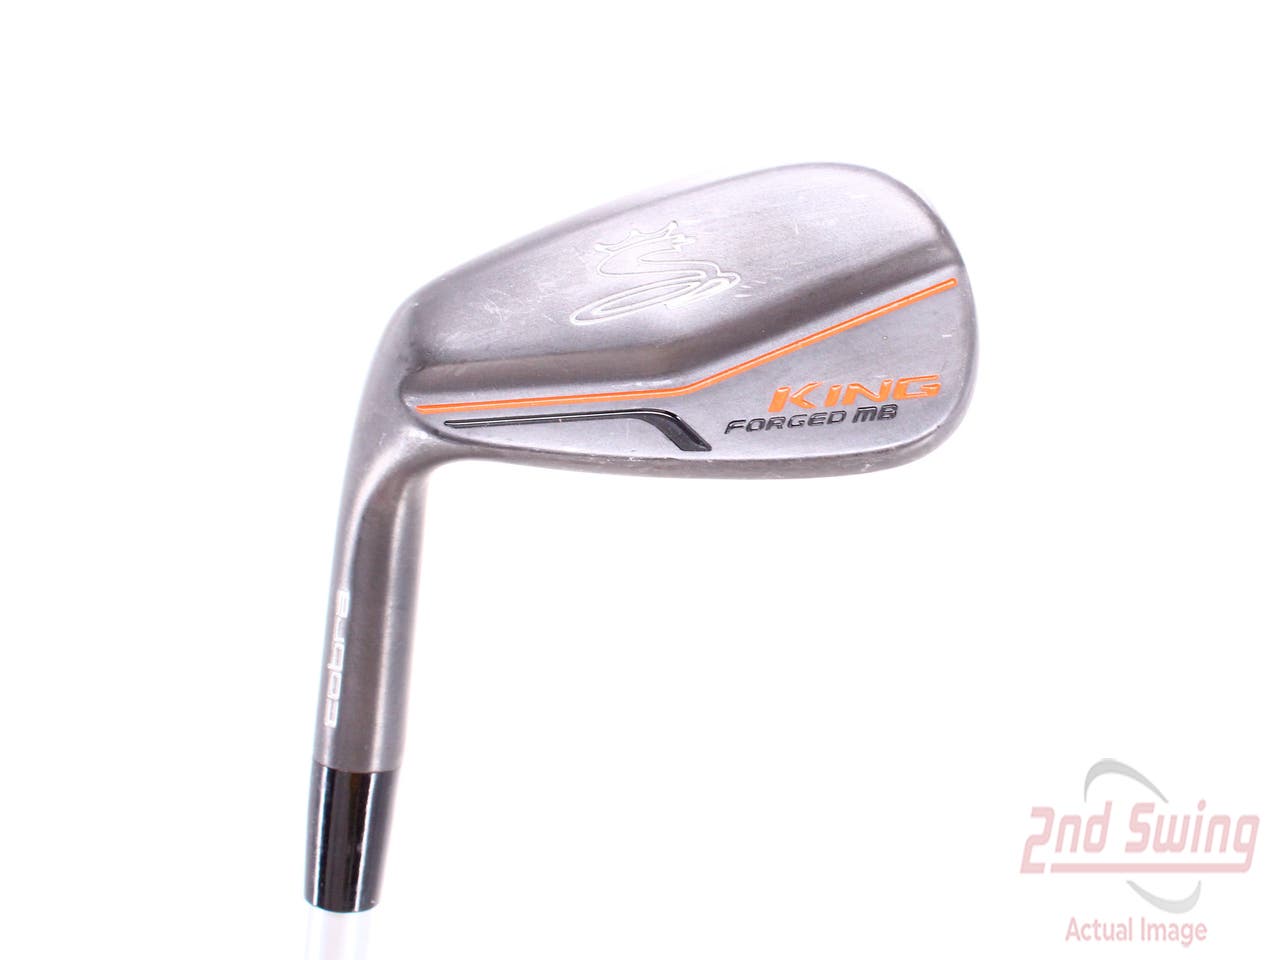 Cobra King Forged MB Wedge Pitching Wedge PW FST KBS Tour C-Taper 120 Steel Stiff Left Handed 36.0in